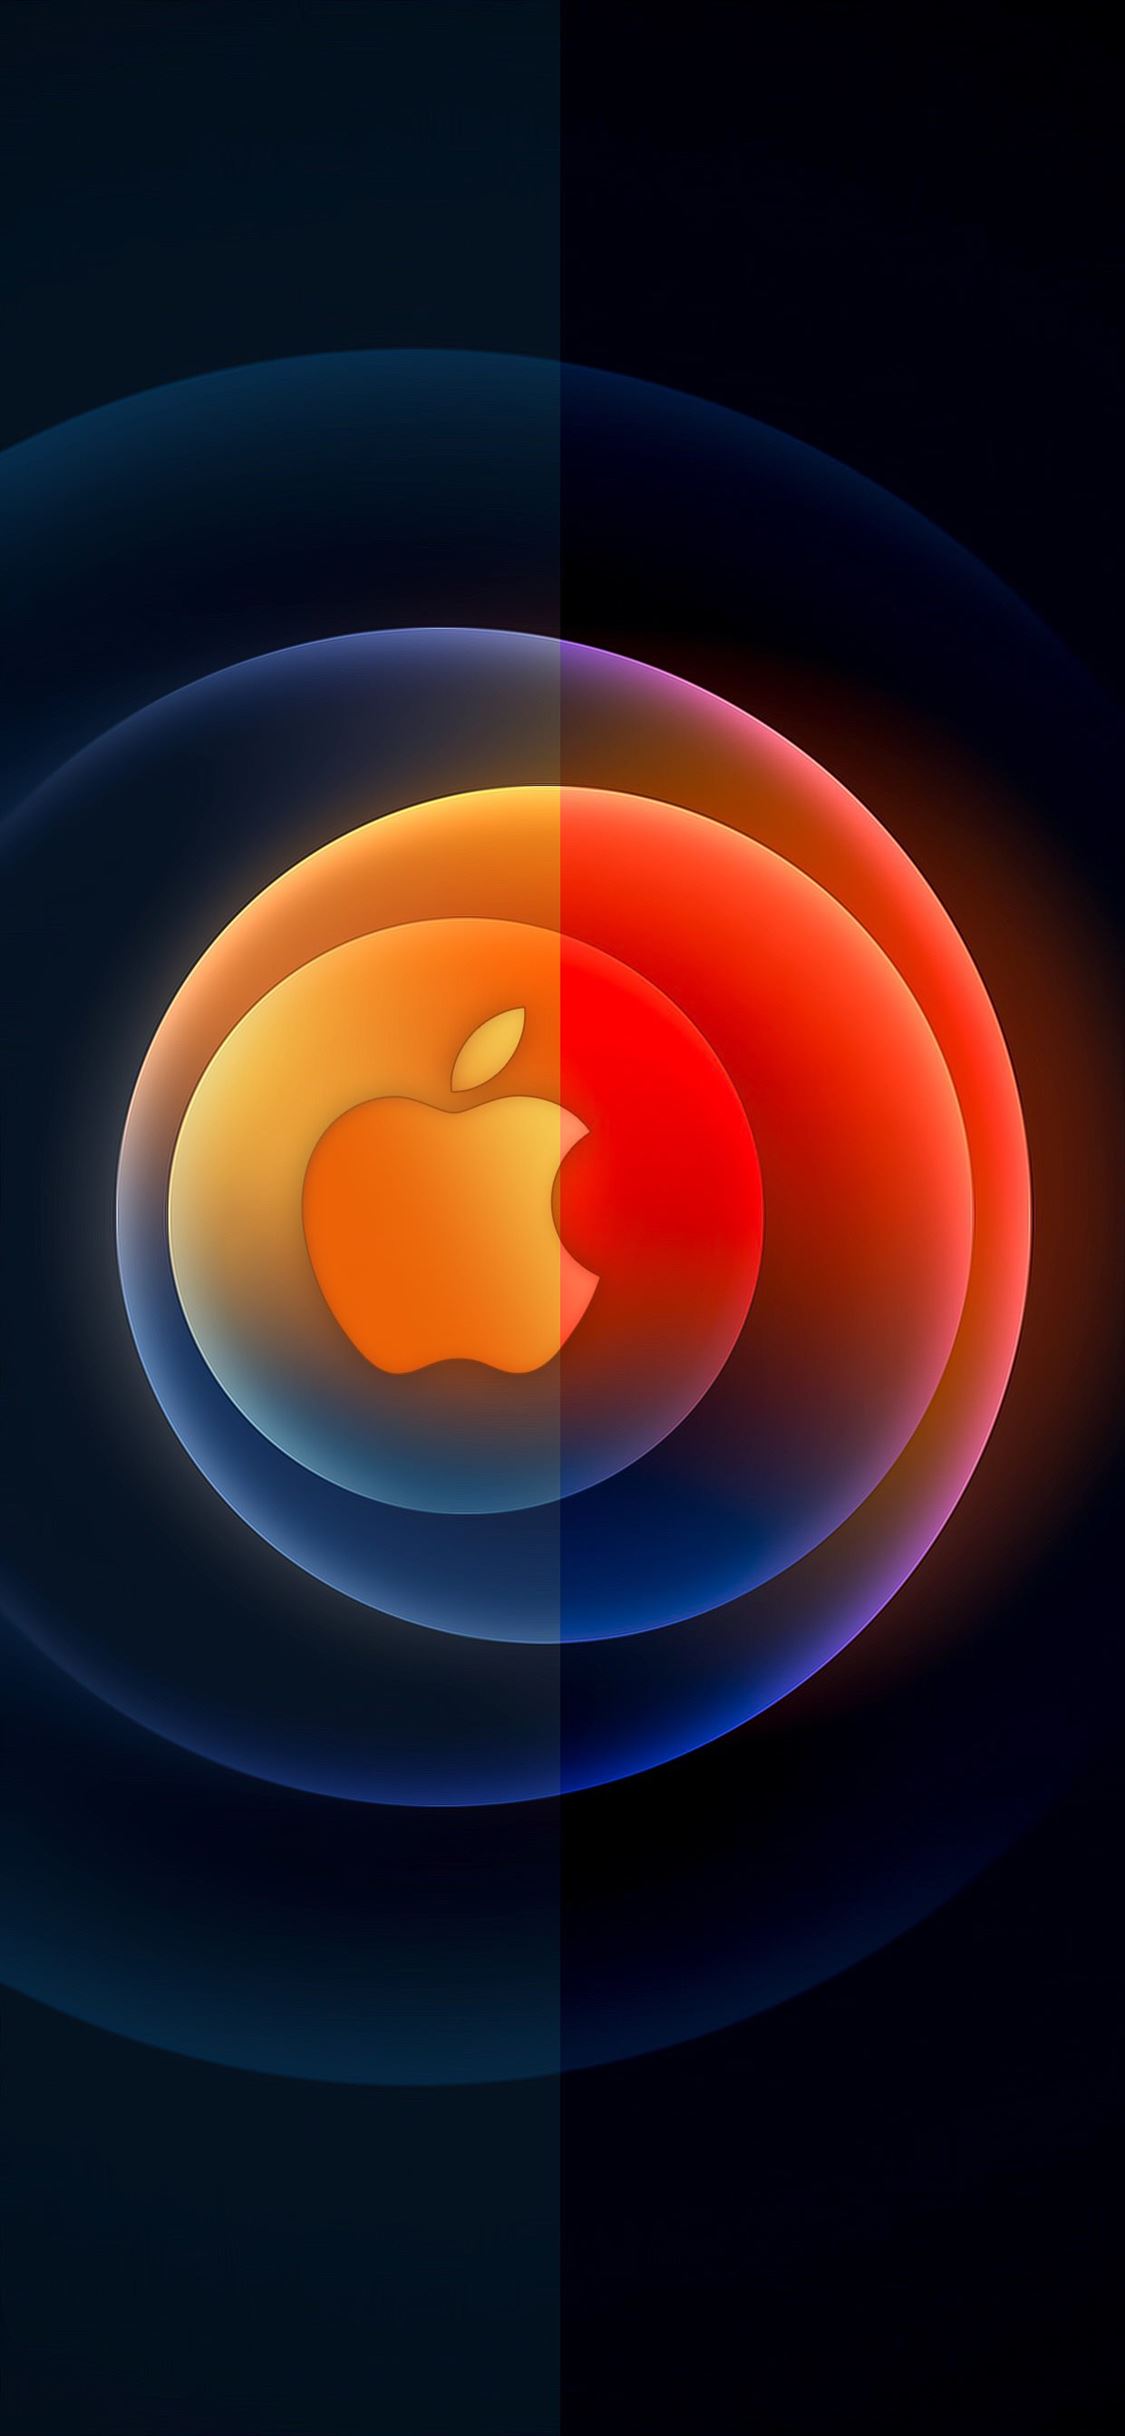 Apple Event 13 Oct DUO Logo by AR7 iPhone Wallpapers Free Download